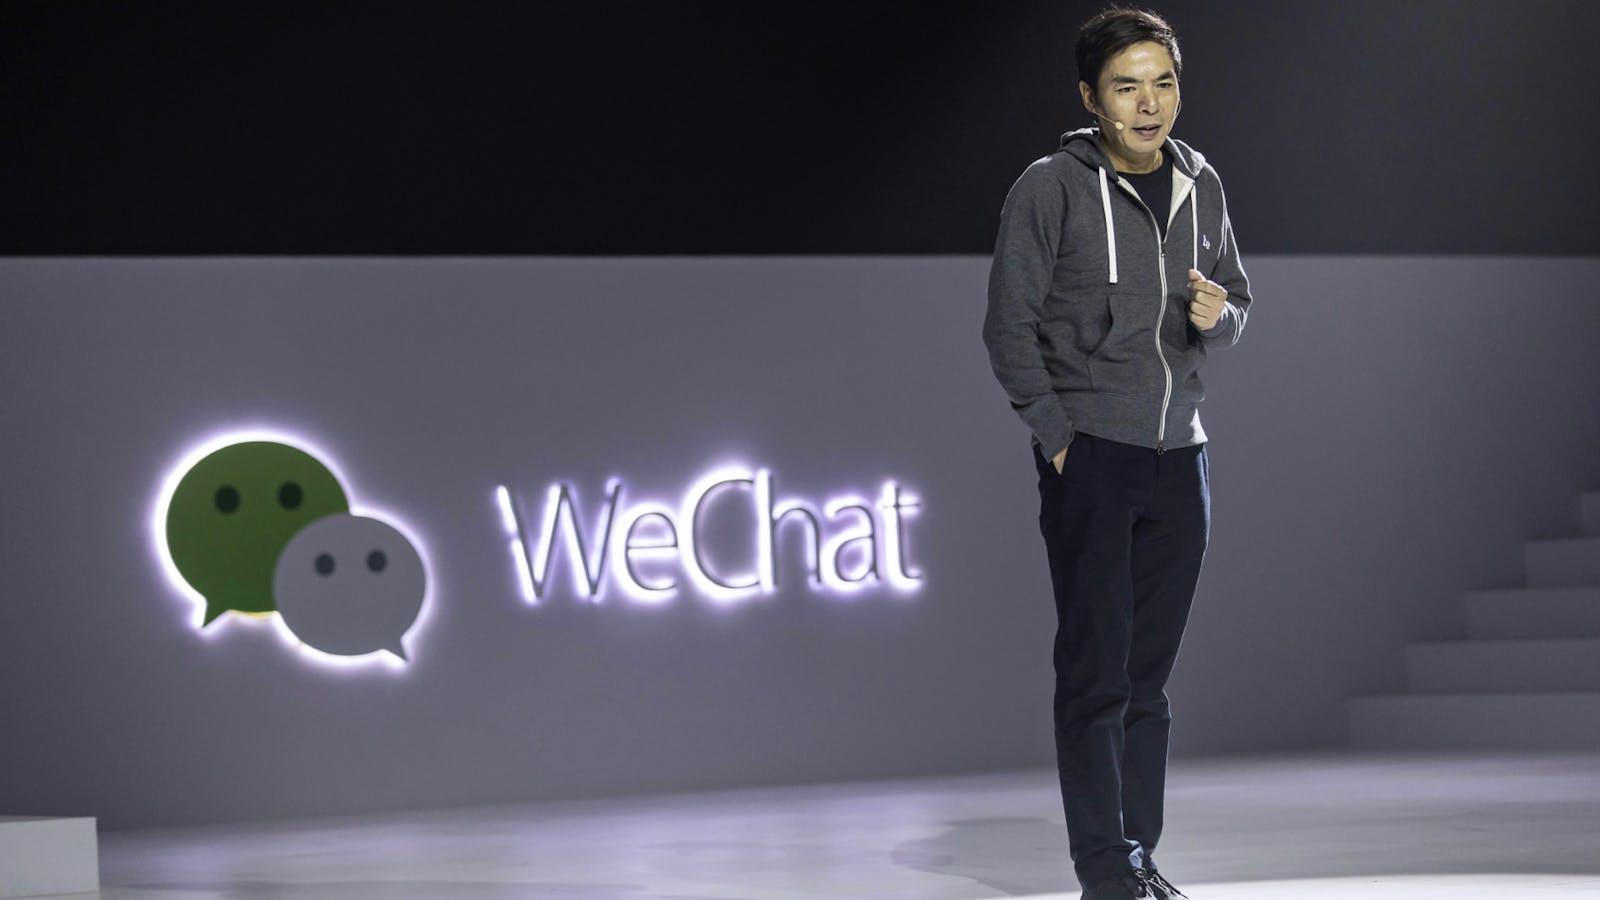 WeChat founder Allen Zhang at a company event in China earlier this year. Photo by Bloomberg